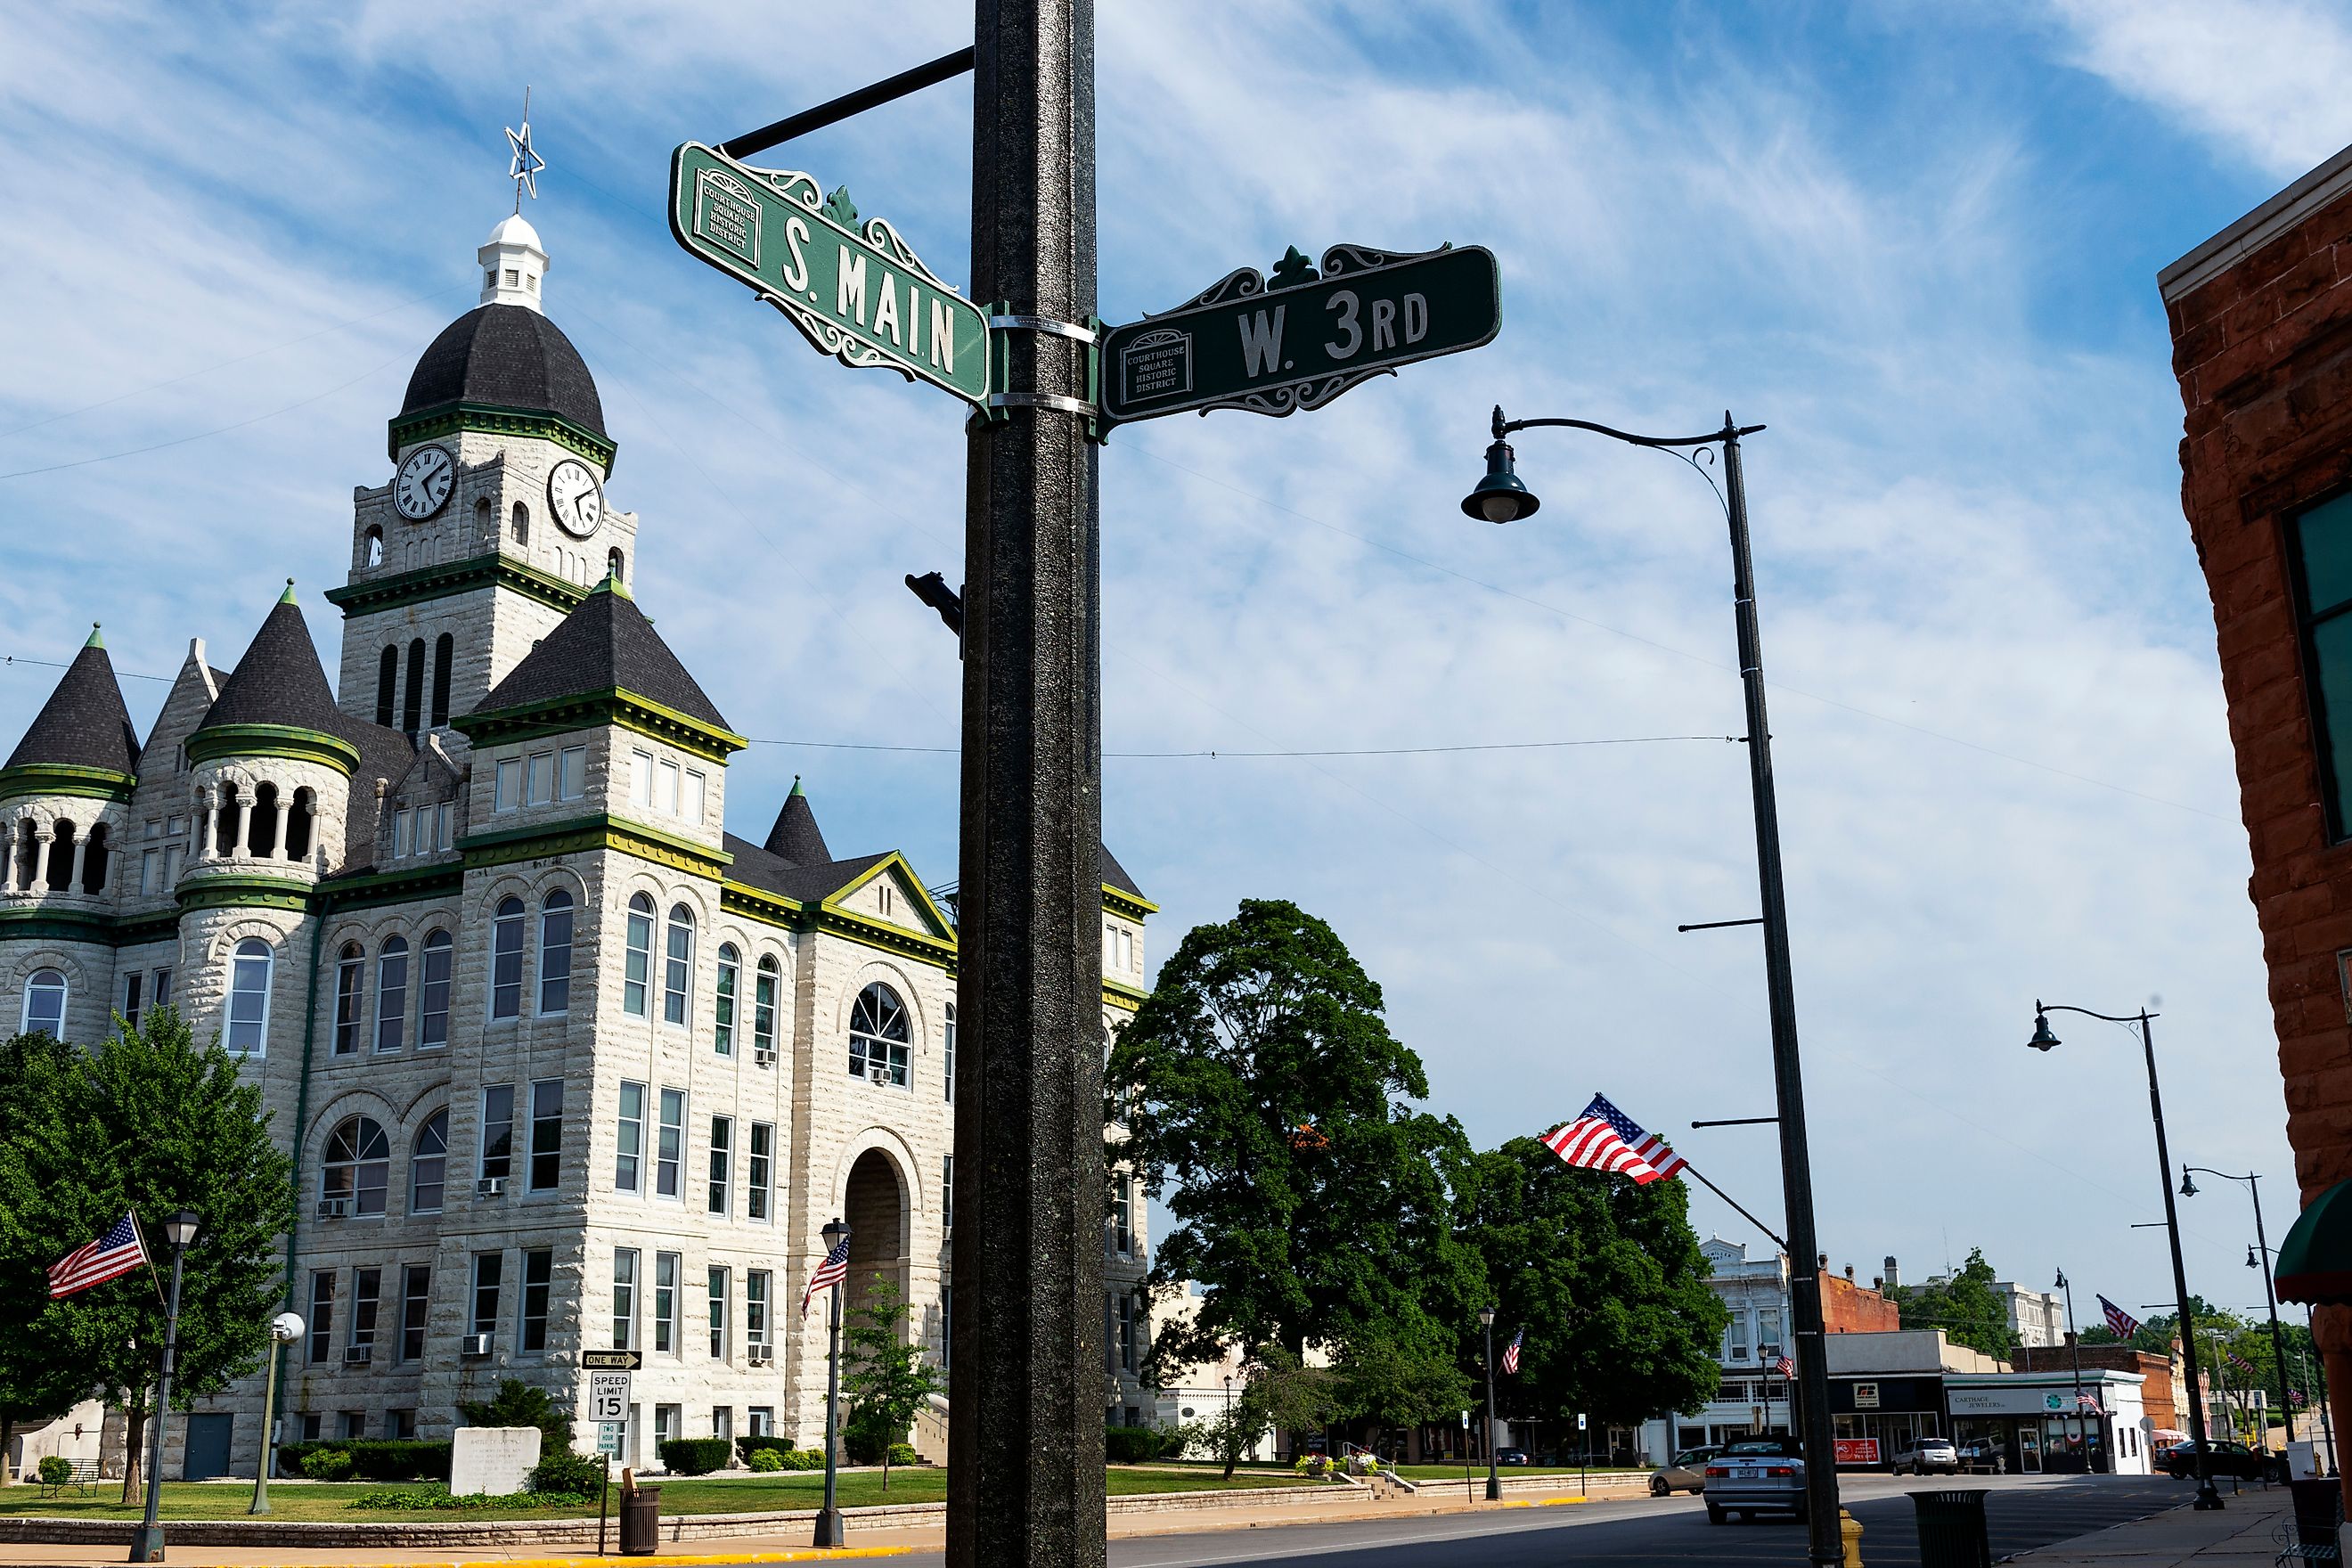 A view of the main street featuring the Jasper County Courthouse in the city of Carthage, Missouri. Editorial credit: TLF Images / Shutterstock.com